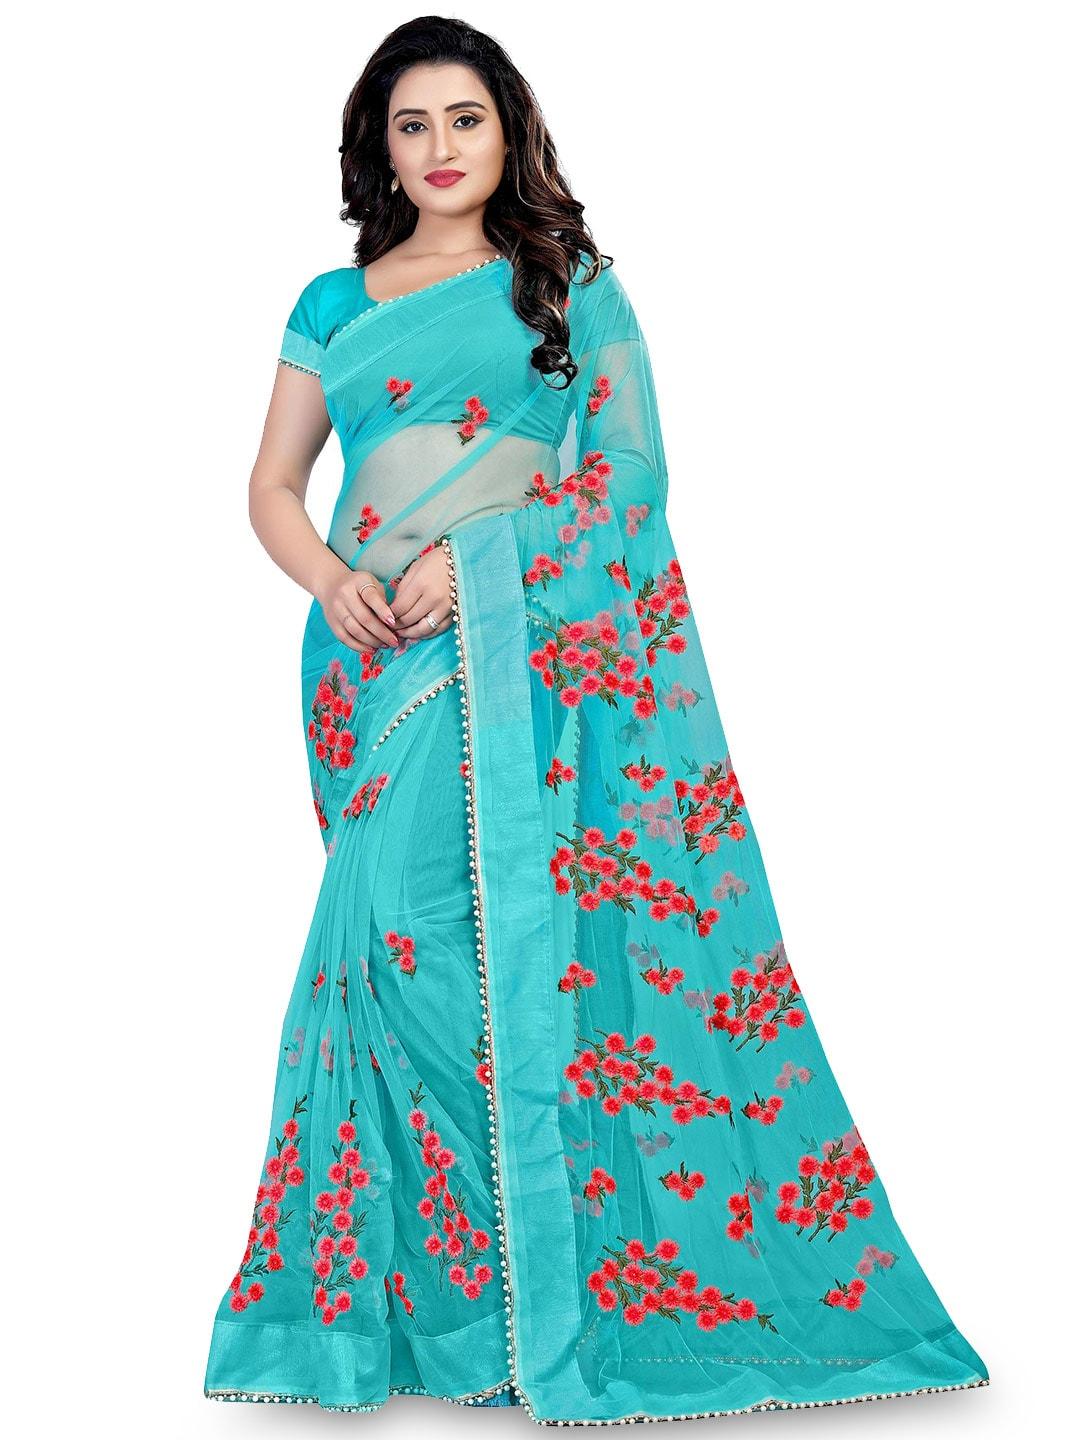 Nityanta Fab Turquoise Blue & Pink Floral Embroidered Net Ikat Saree